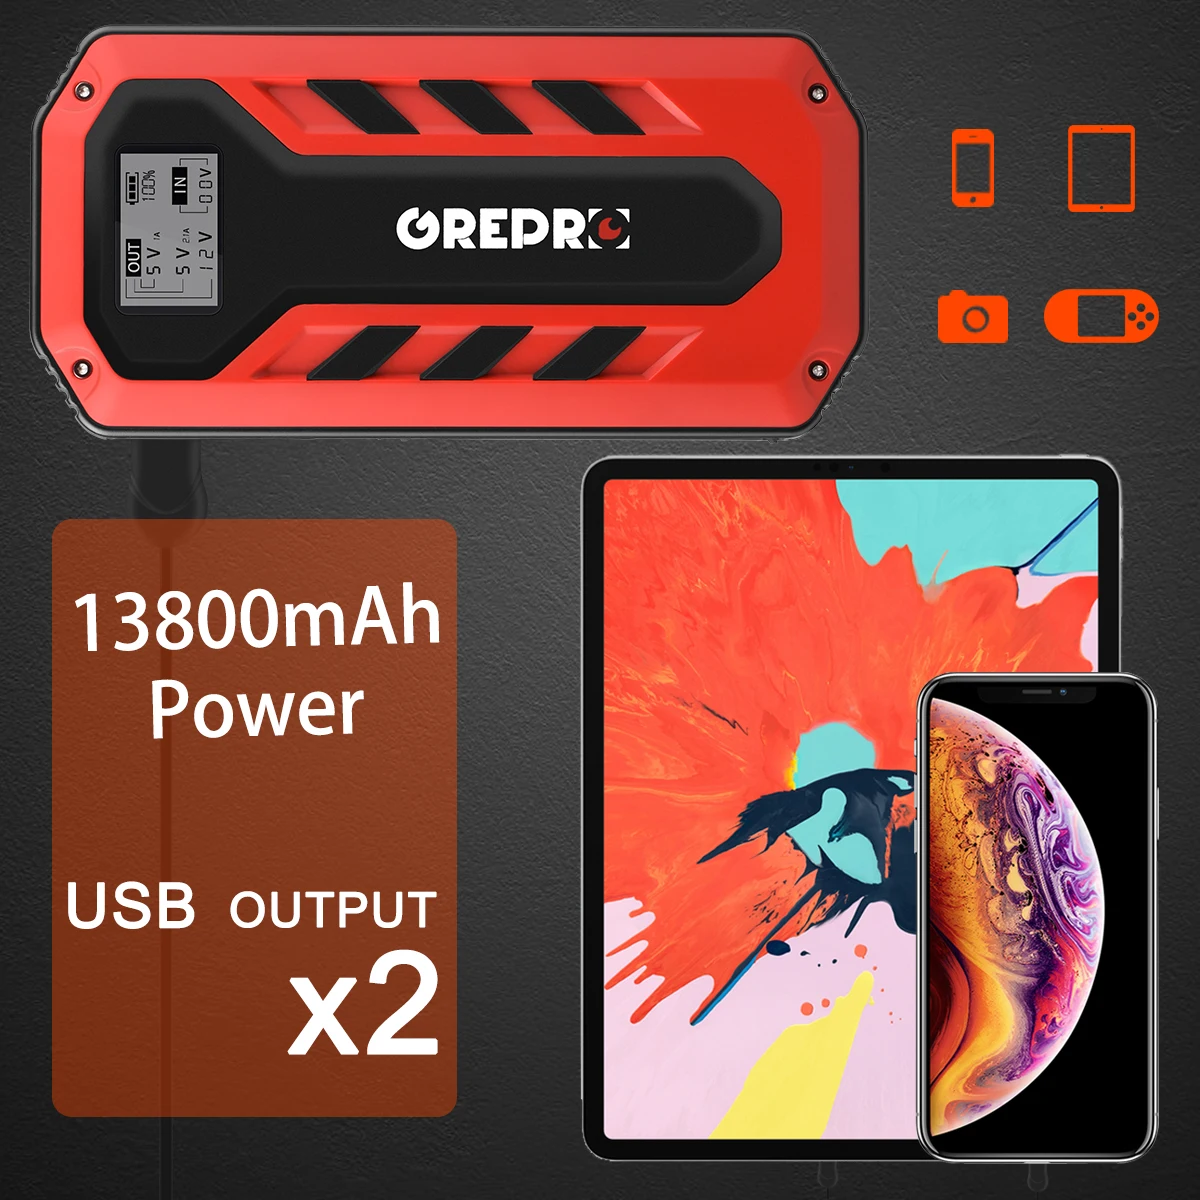 GREPRO Portable 13800mAH Car Jump Starter 1000A Peak 12V Auto Battery Booster Portable Power Pack with LCD Display Jumper Cable noco gb40